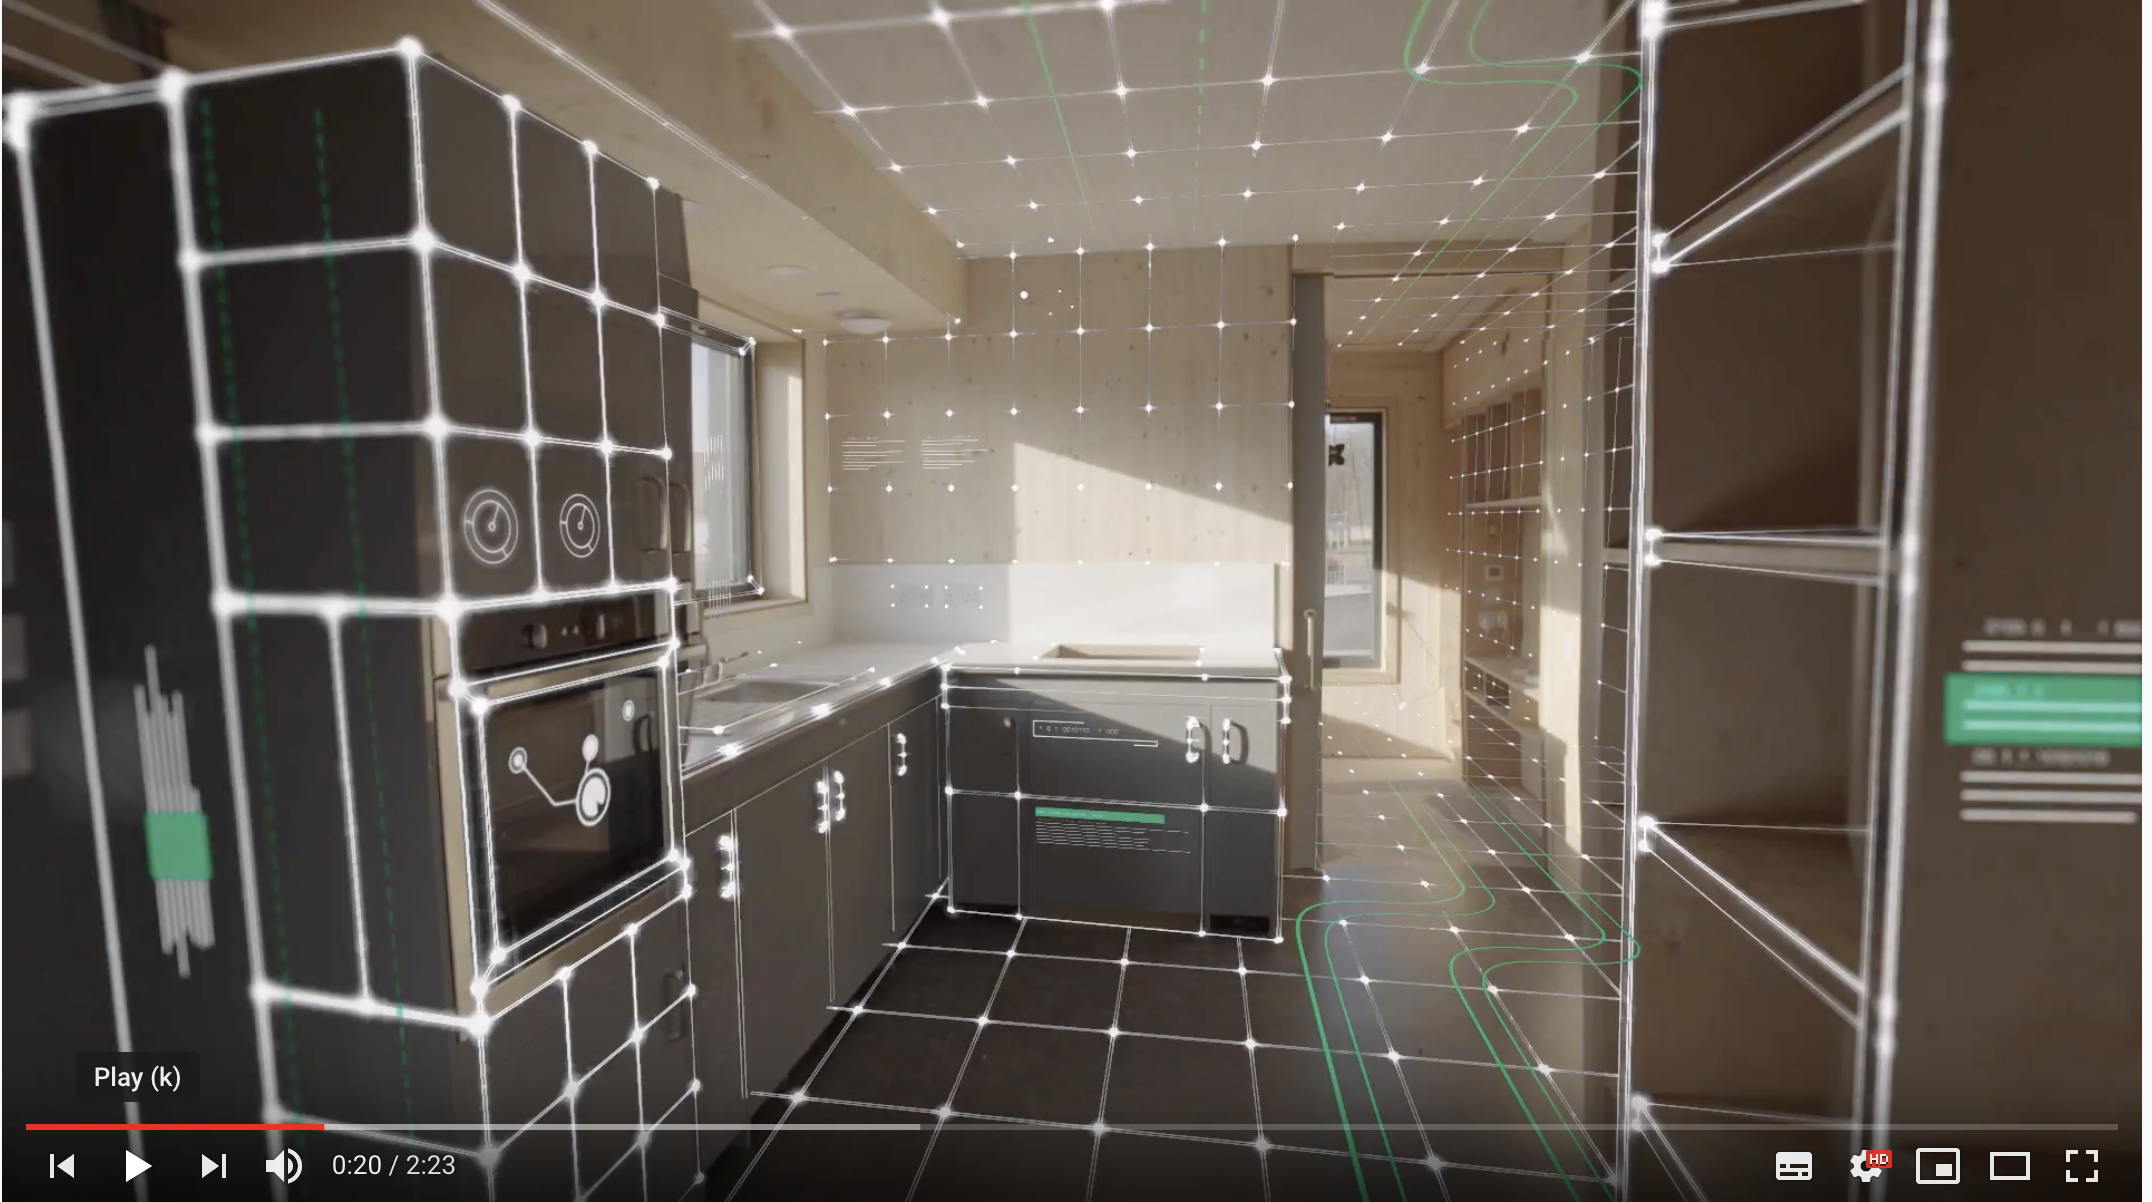 Picture of a kitchen with lines overlaid to indicate smart sensors